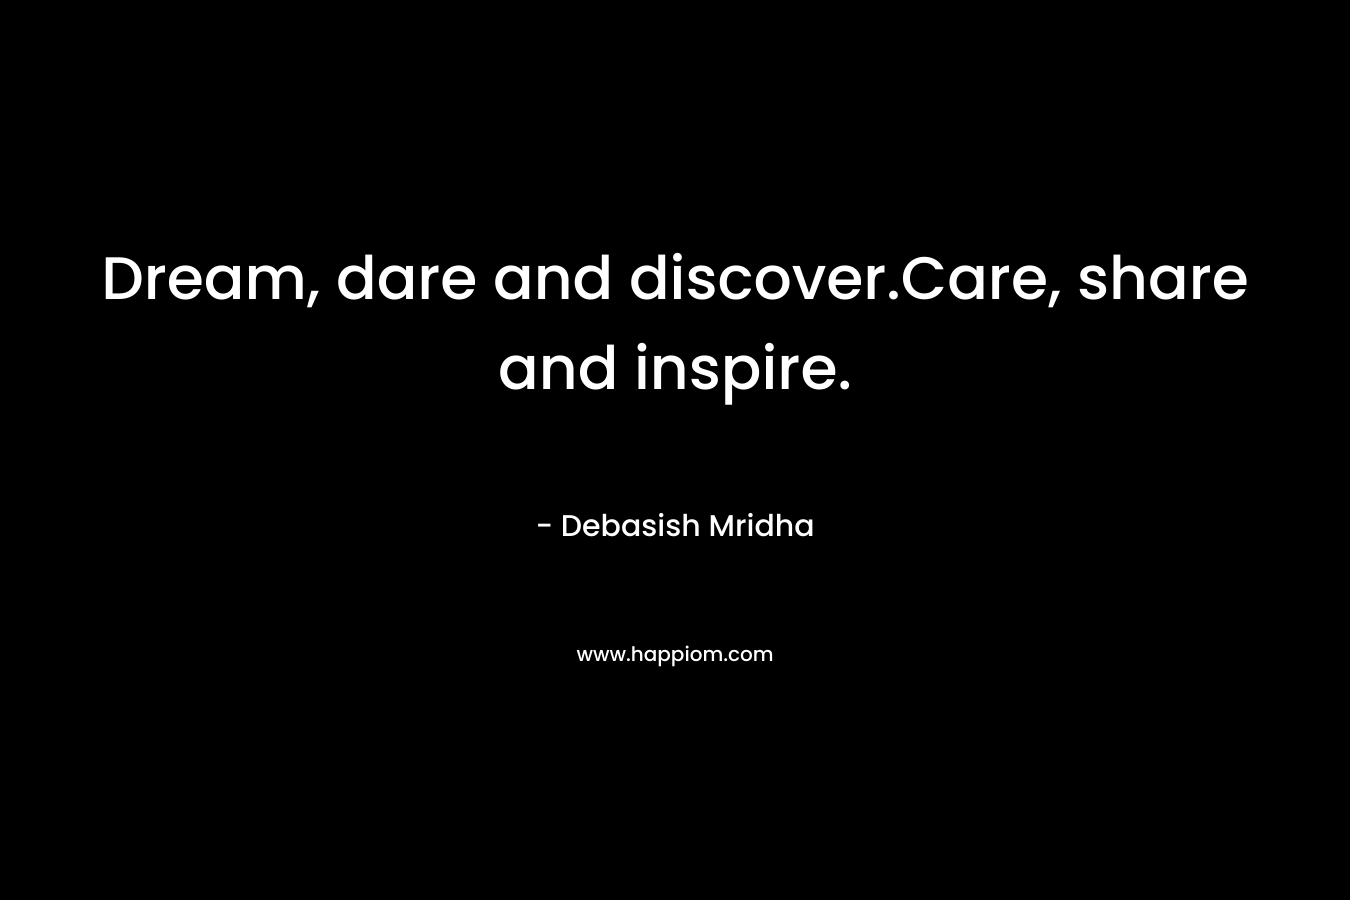 Dream, dare and discover.Care, share and inspire.